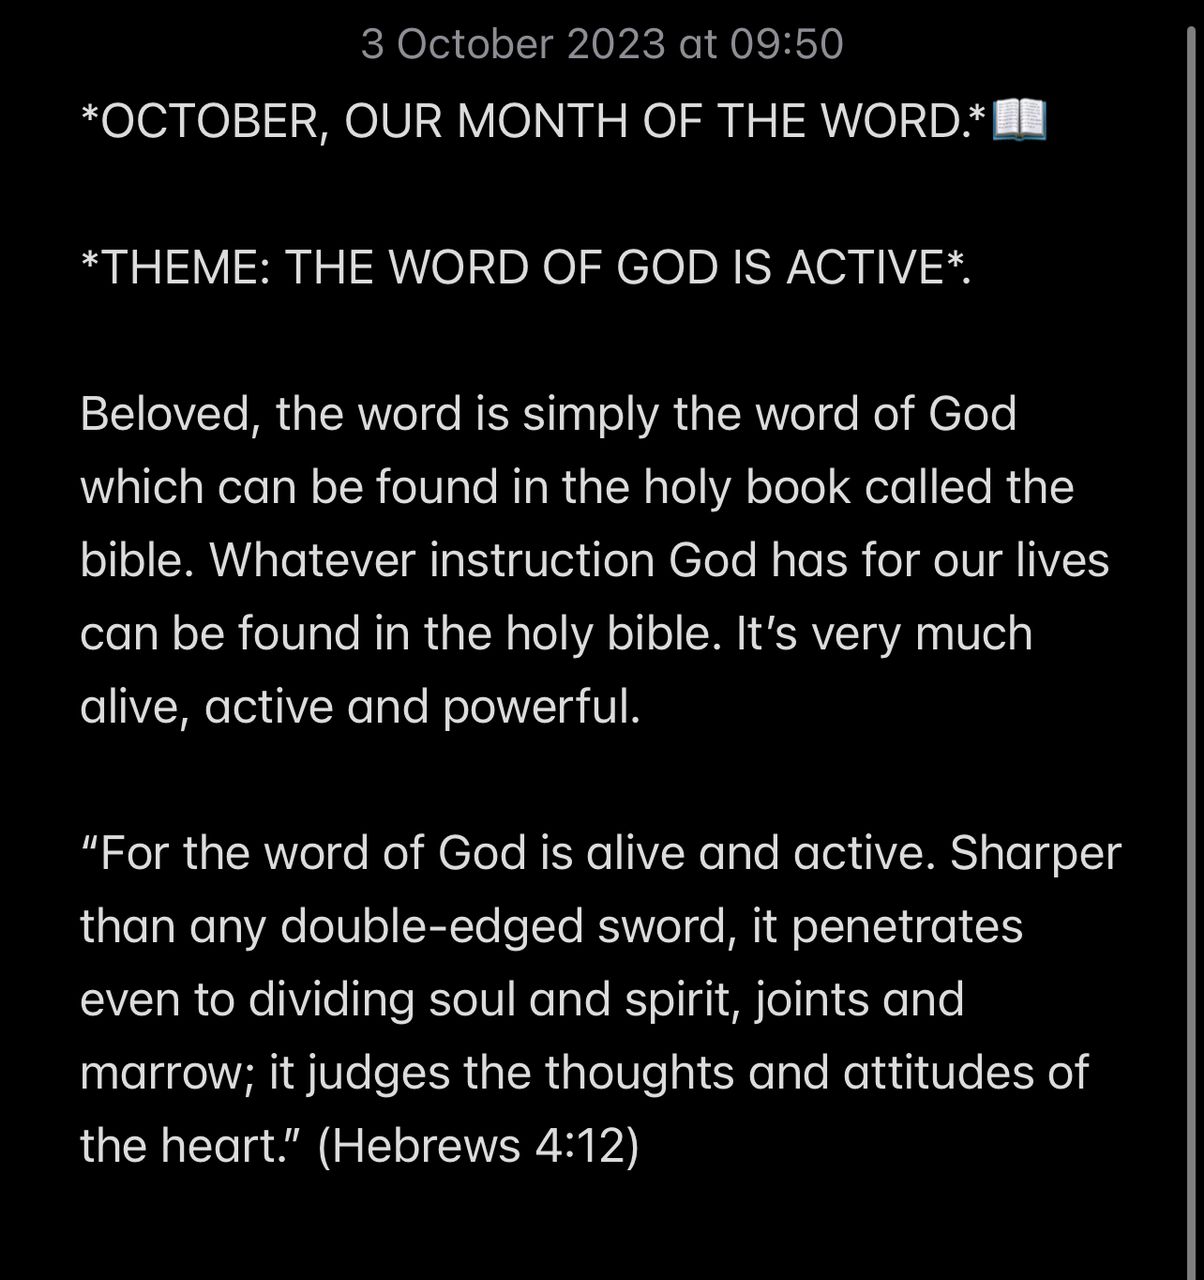 THE WORD OF GOD IS ACTIVE.